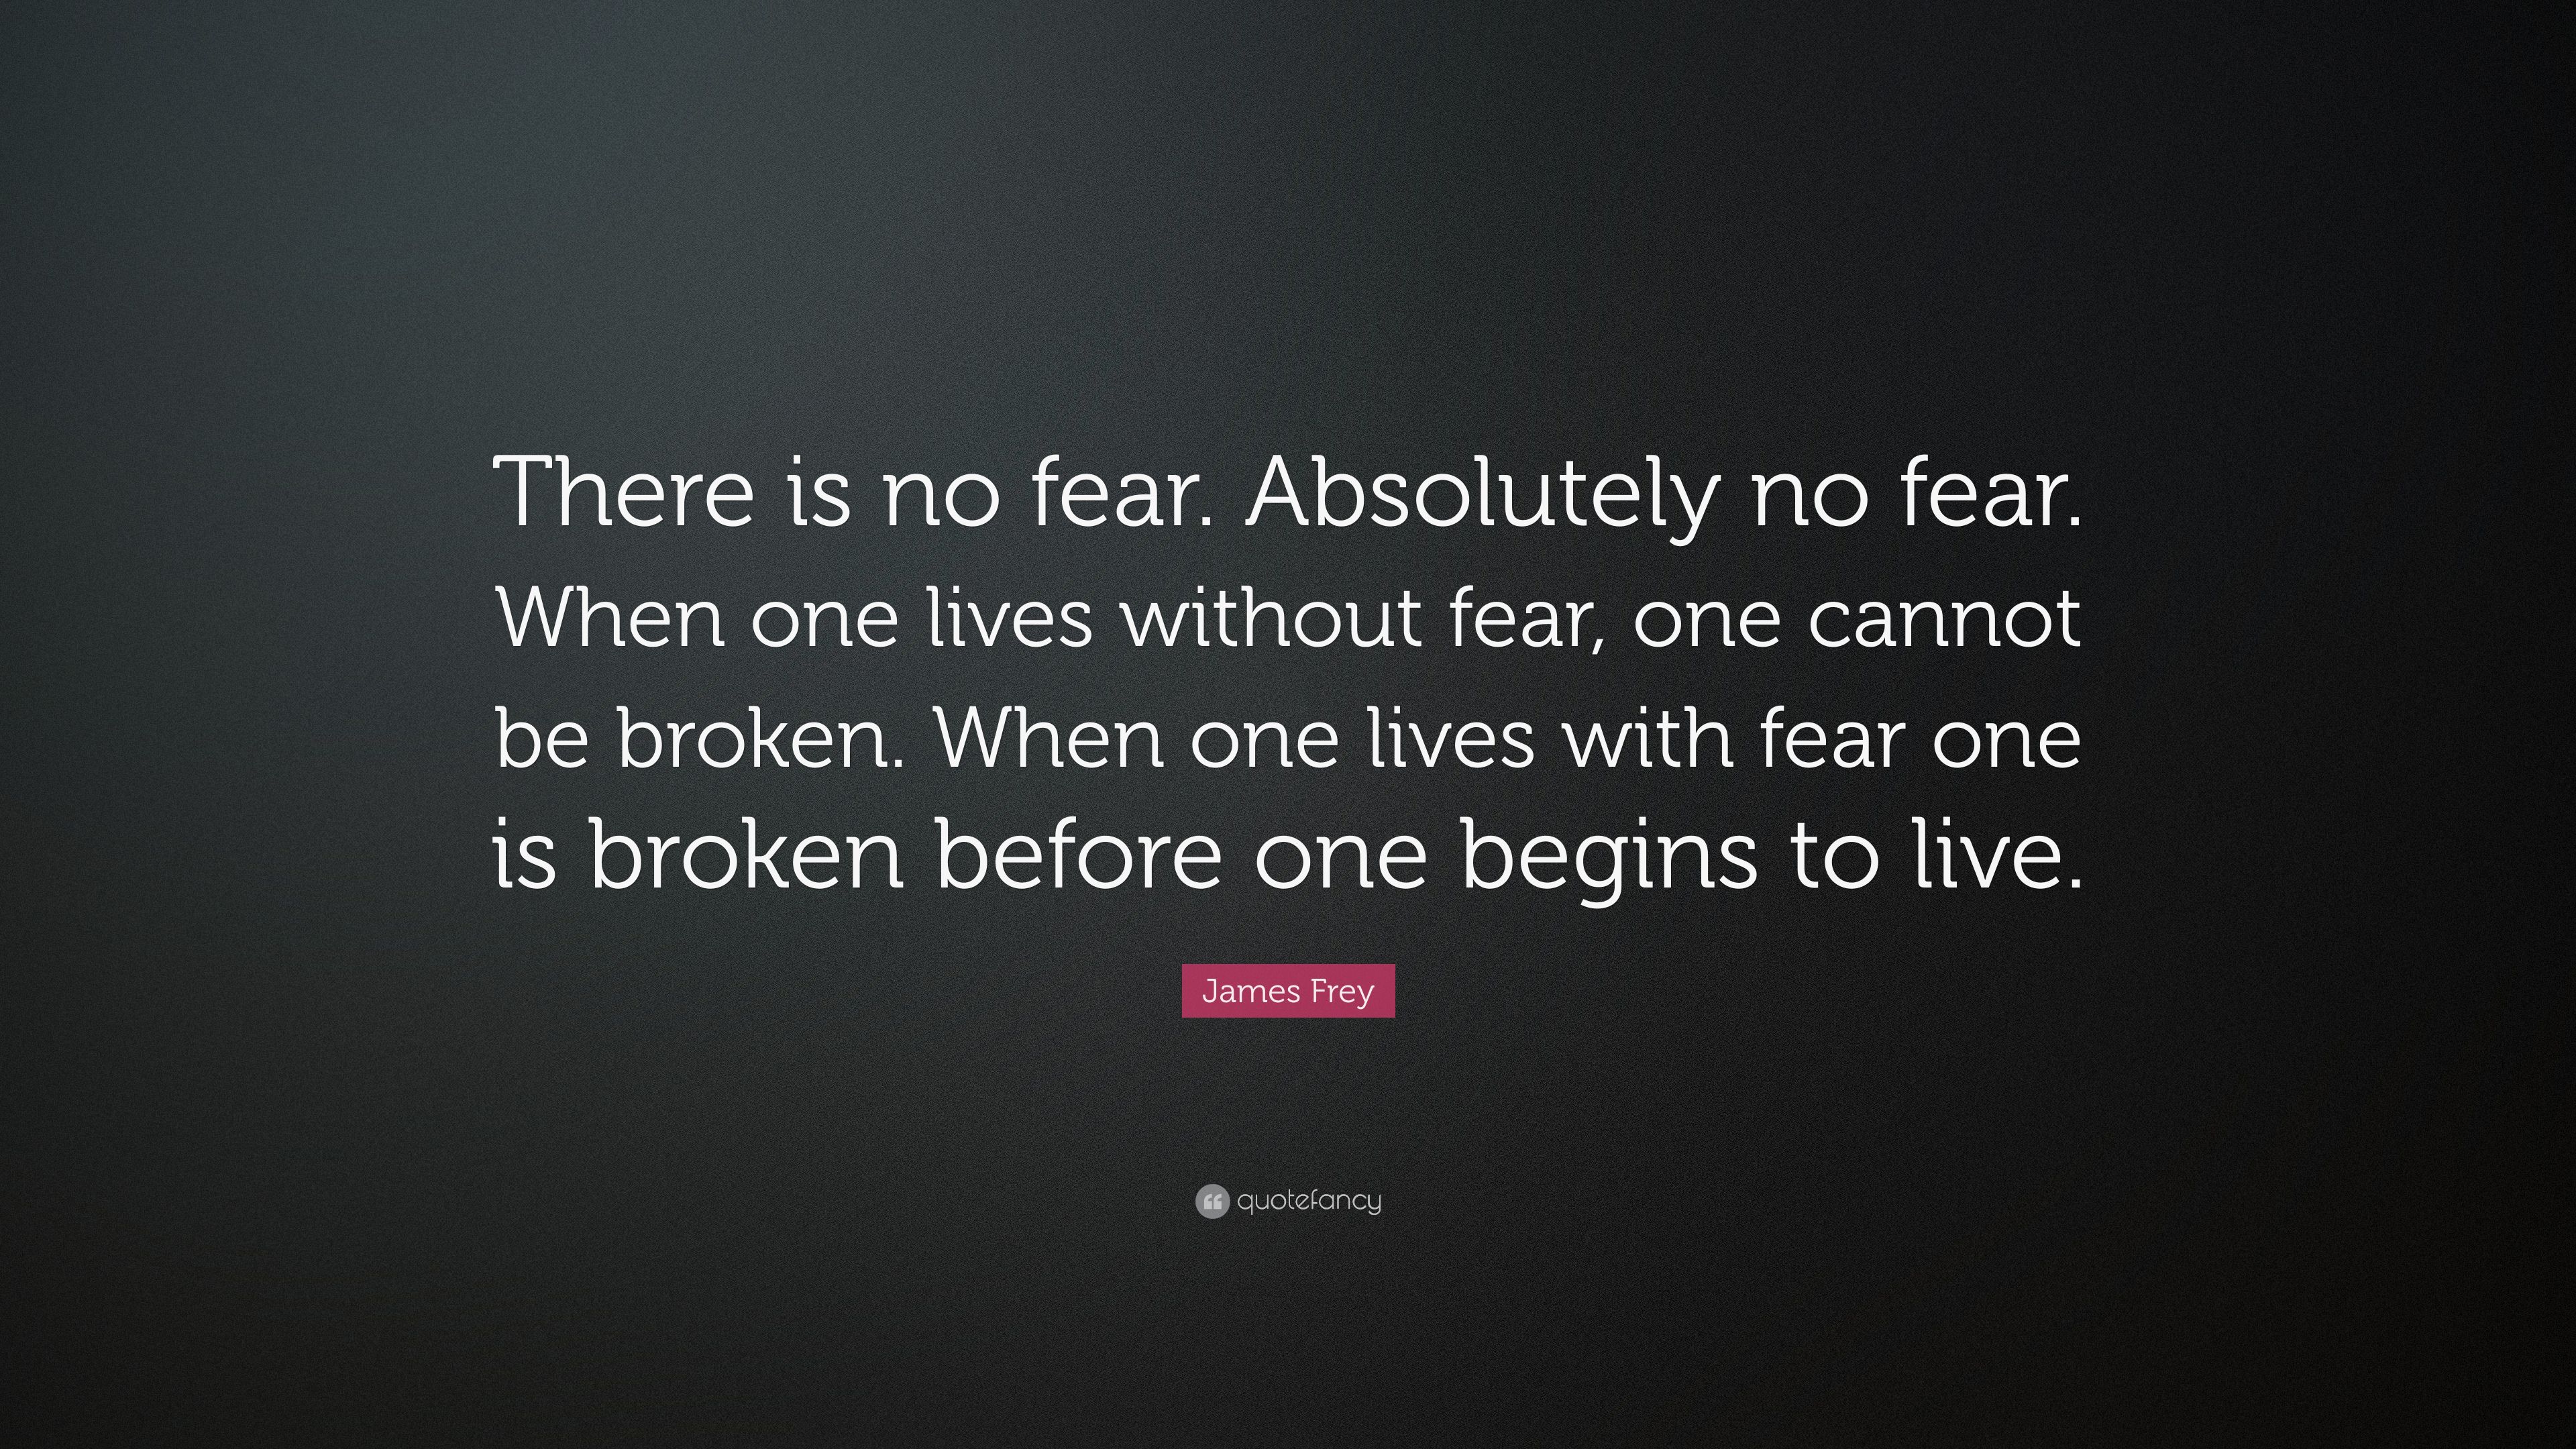 James Frey Quote: “There is no fear. Absolutely no fear. When one